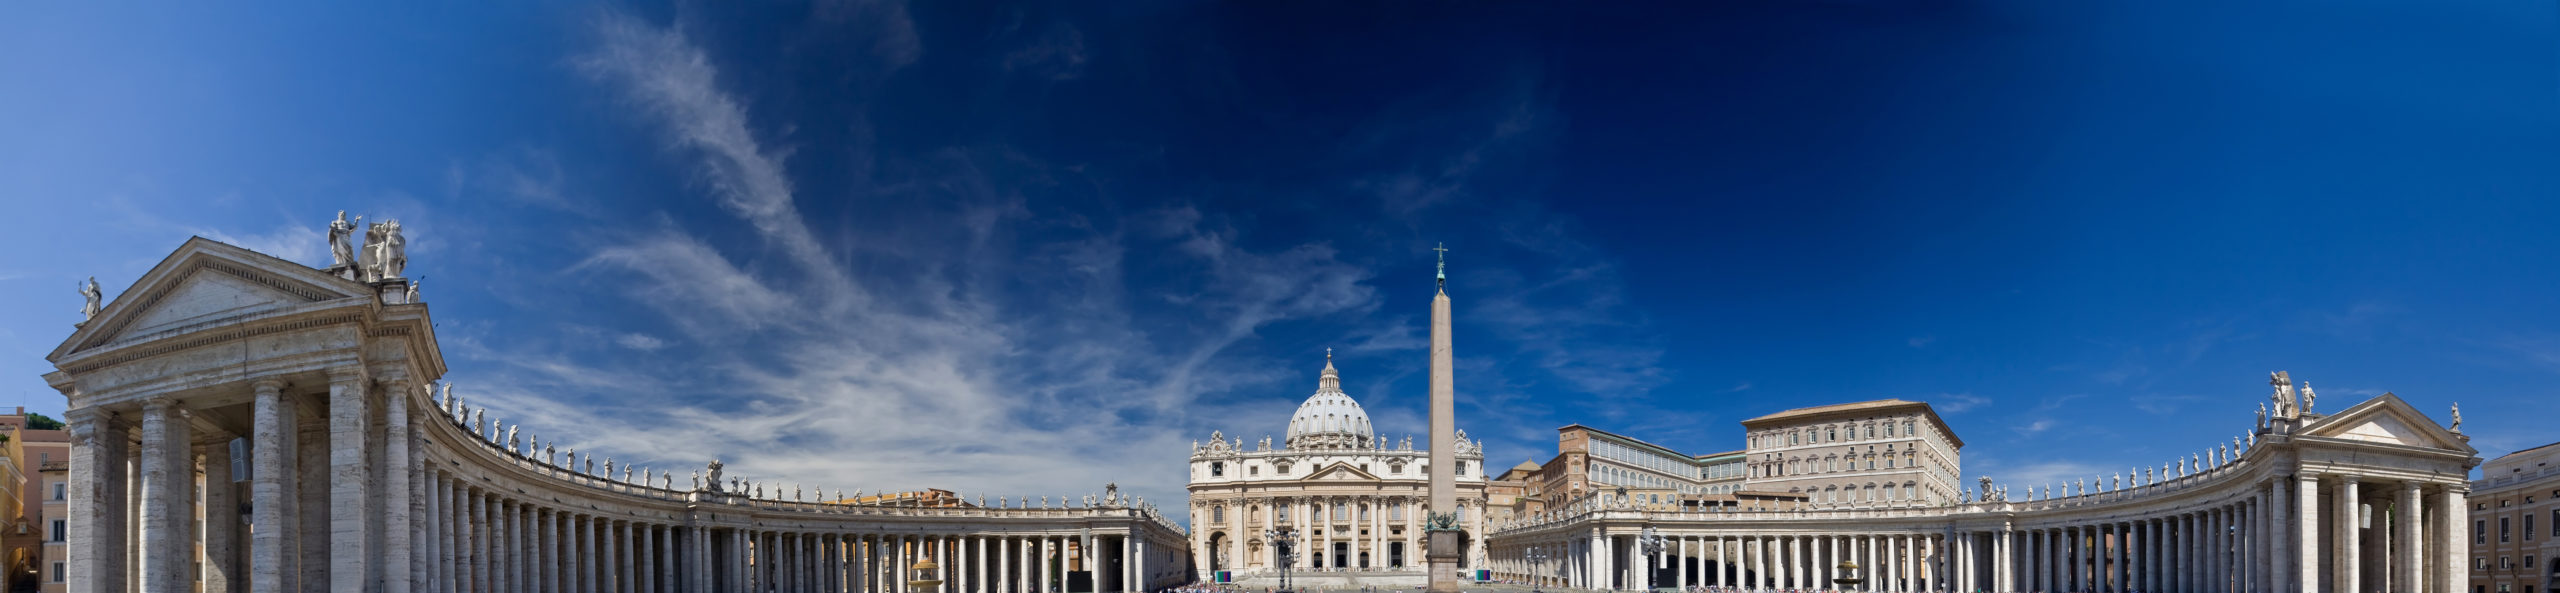 "Panoramic shot of the St Peter's Square built by Gian Lorenzo Bernini in Vatican City, Rome, Italy"